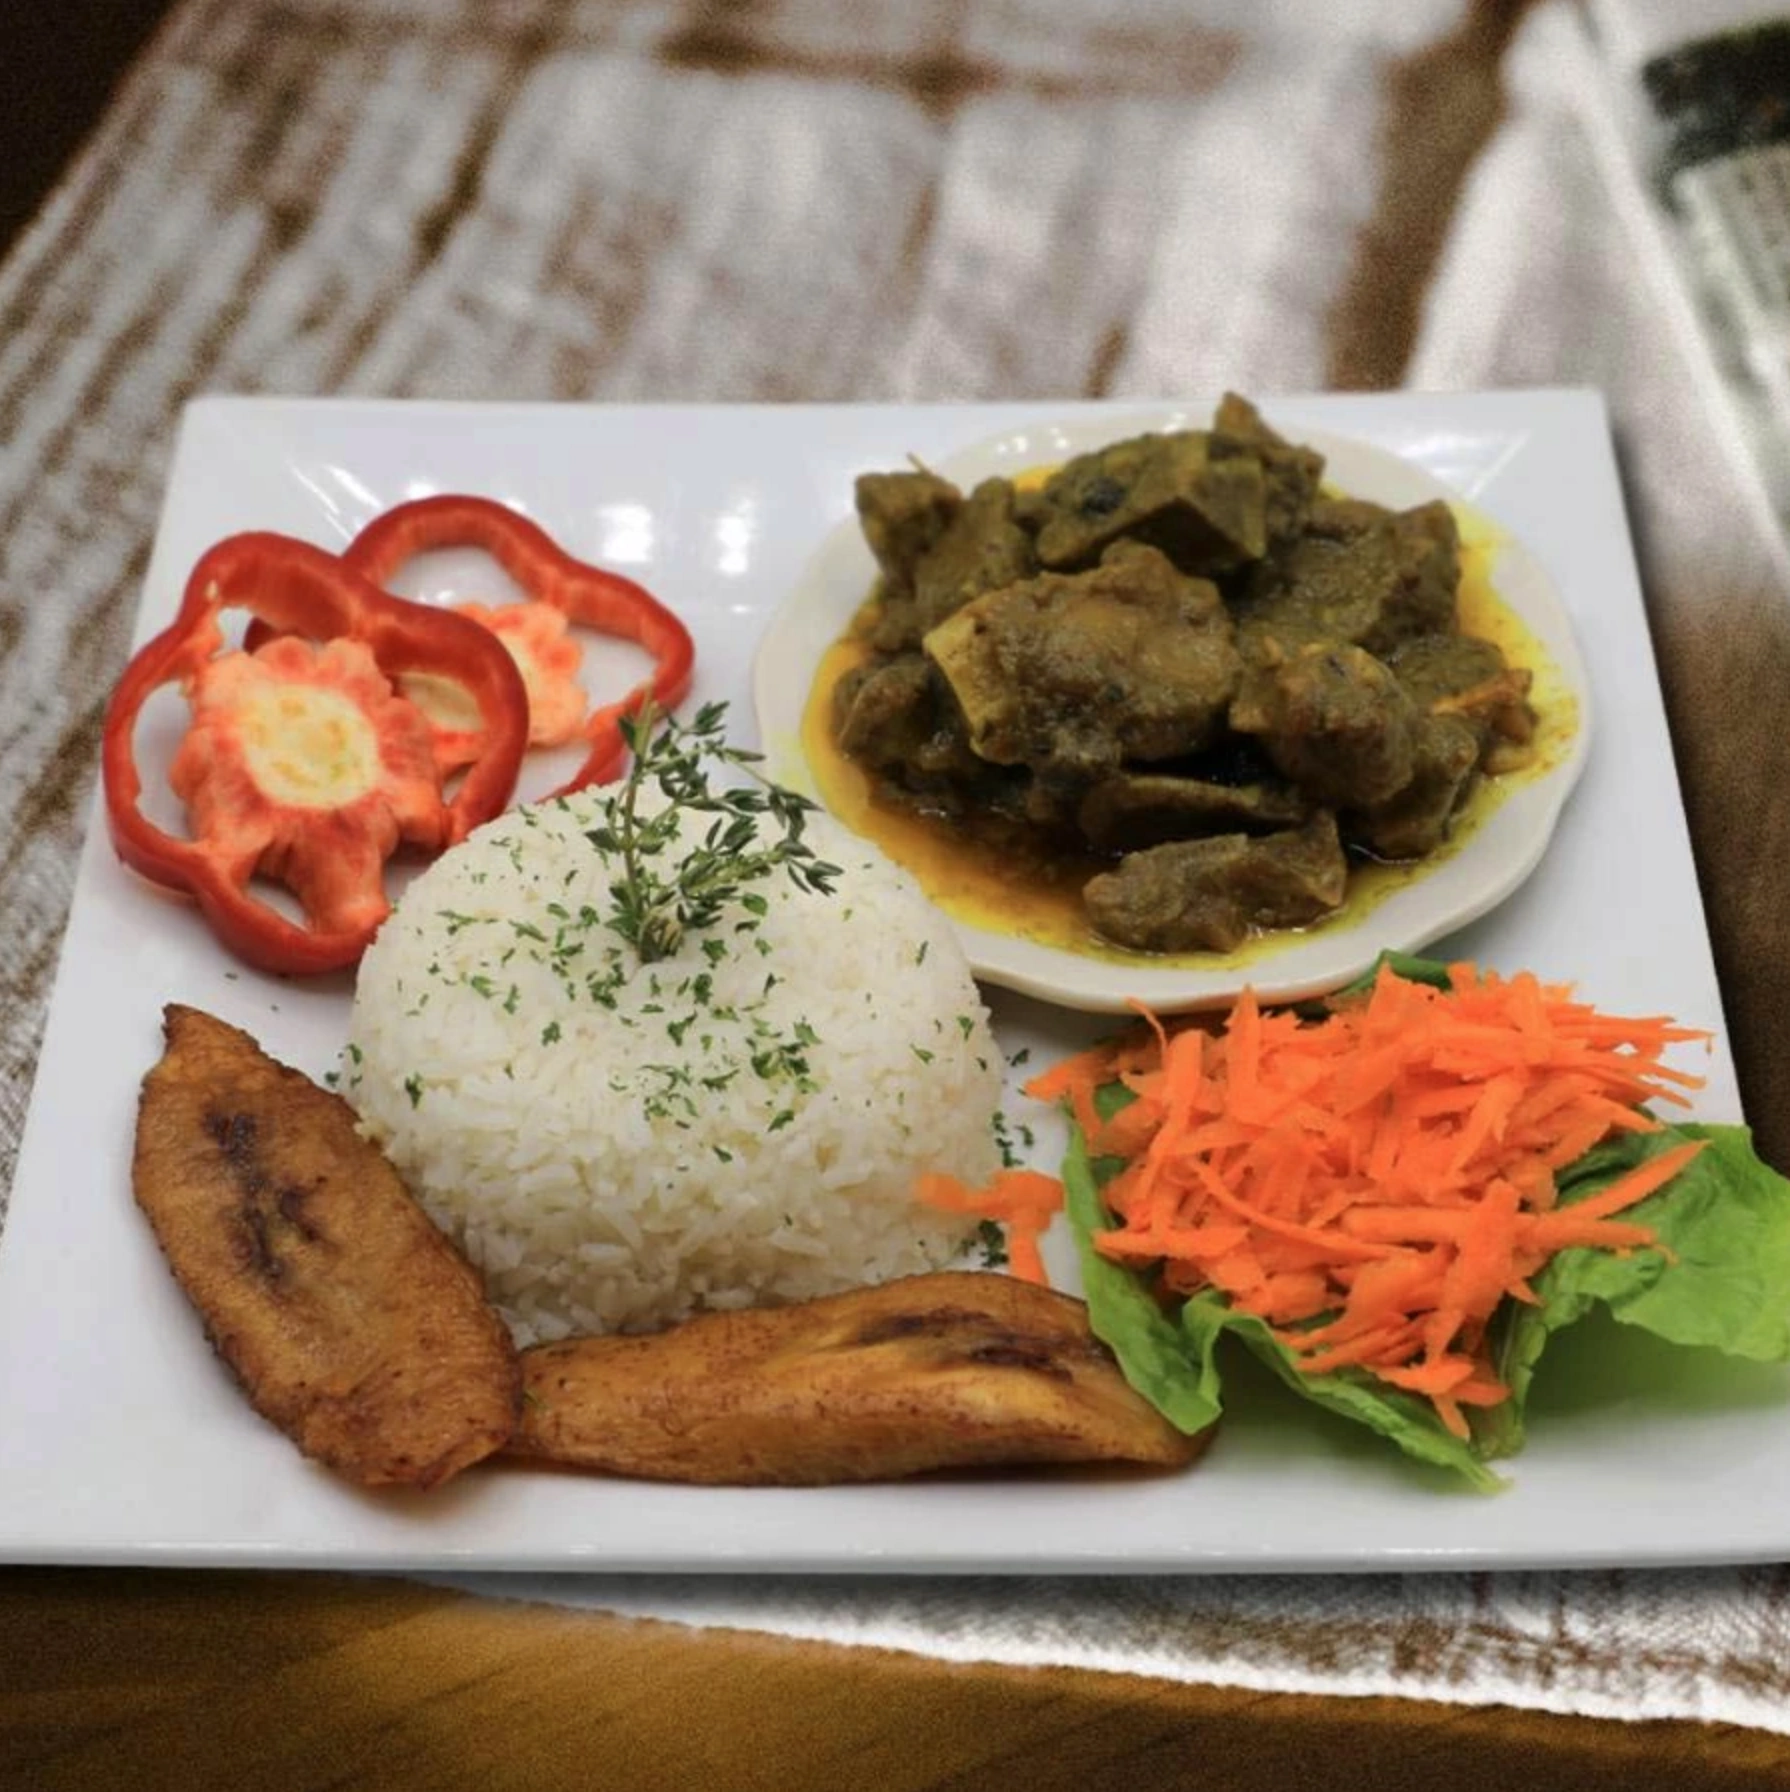 Rice dish with plantain slices, salad, slices of red pepper and a small plate of meat in sauce